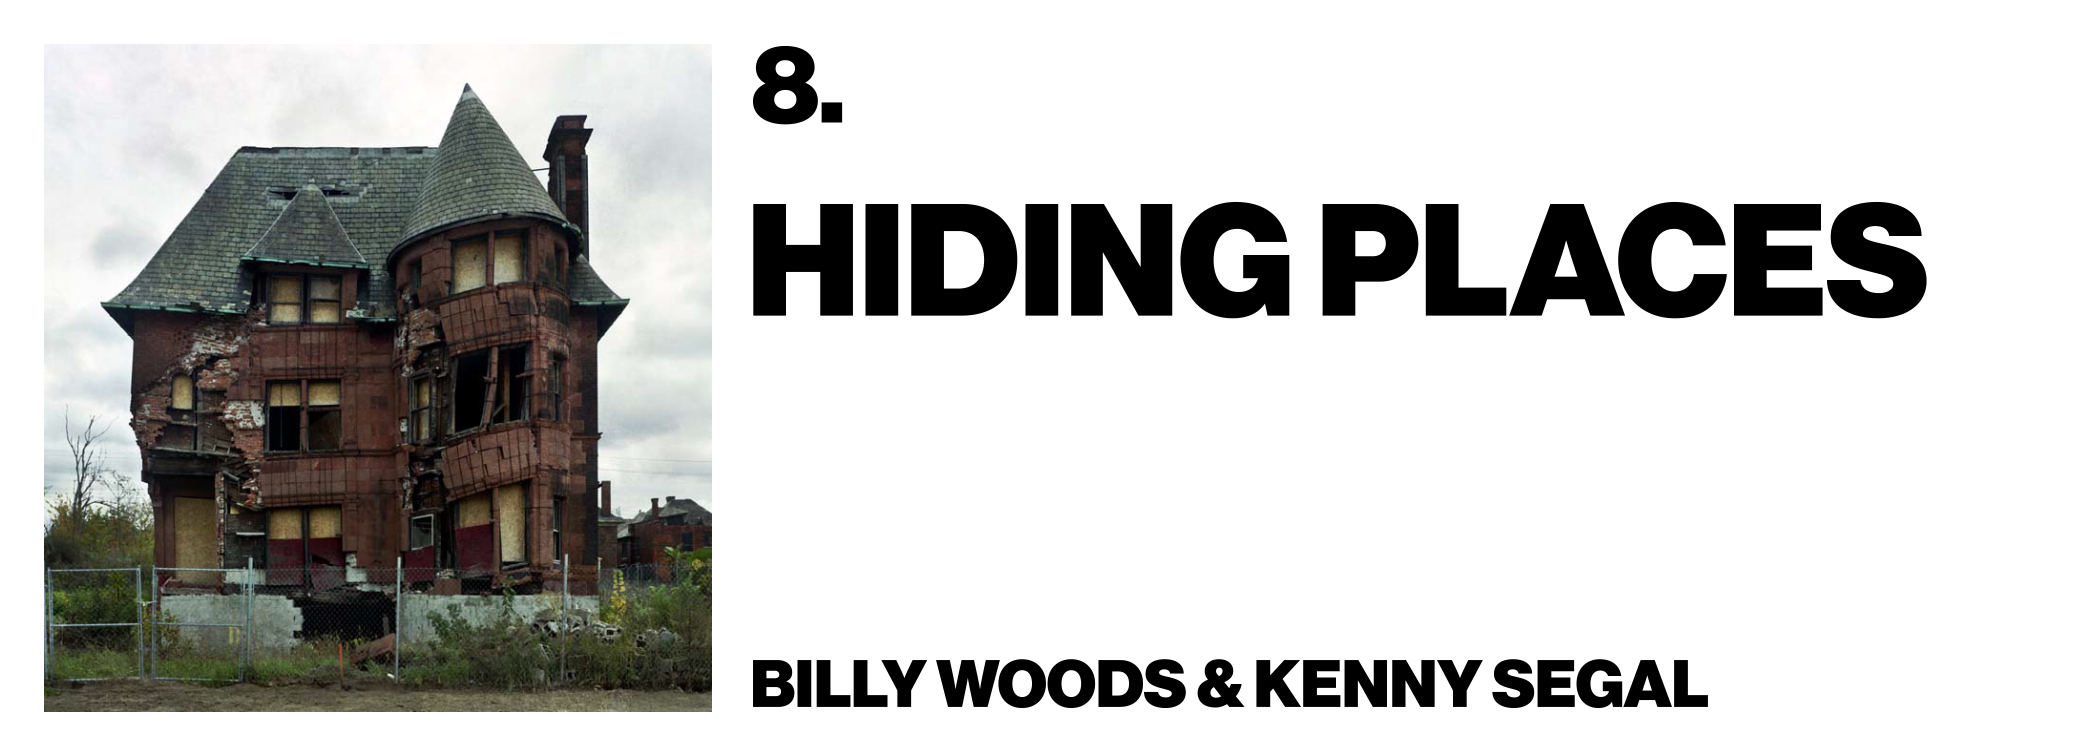 1576016326516-8-Billy-Woods-_-Kenny-Segal-Hiding-Places